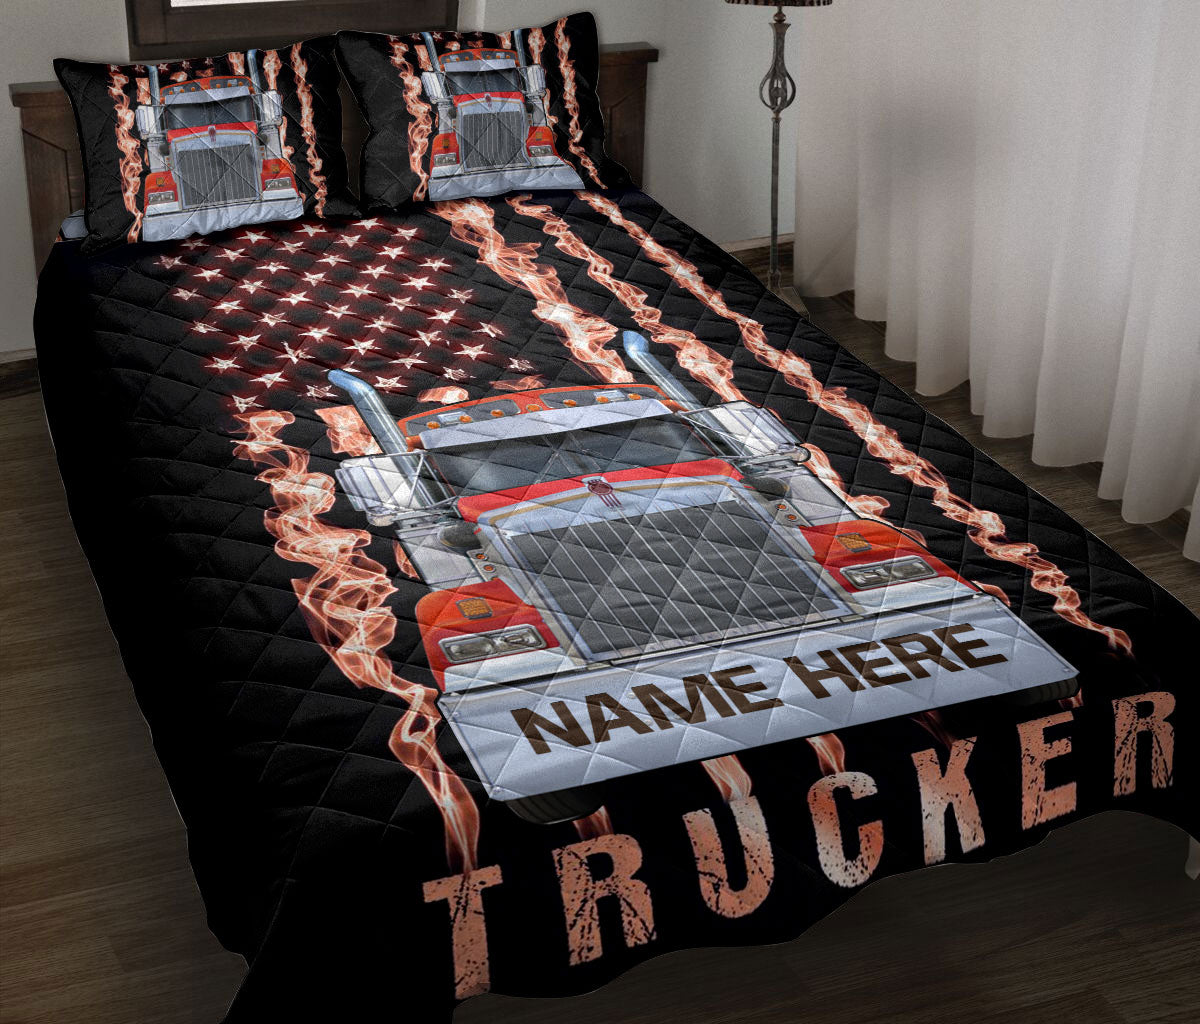 Ohaprints-Quilt-Bed-Set-Pillowcase-Red-Truck-Us-Flag-Smoke-Gift-For-Trucker-Custom-Personalized-Name-Blanket-Bedspread-Bedding-3523-Throw (55'' x 60'')